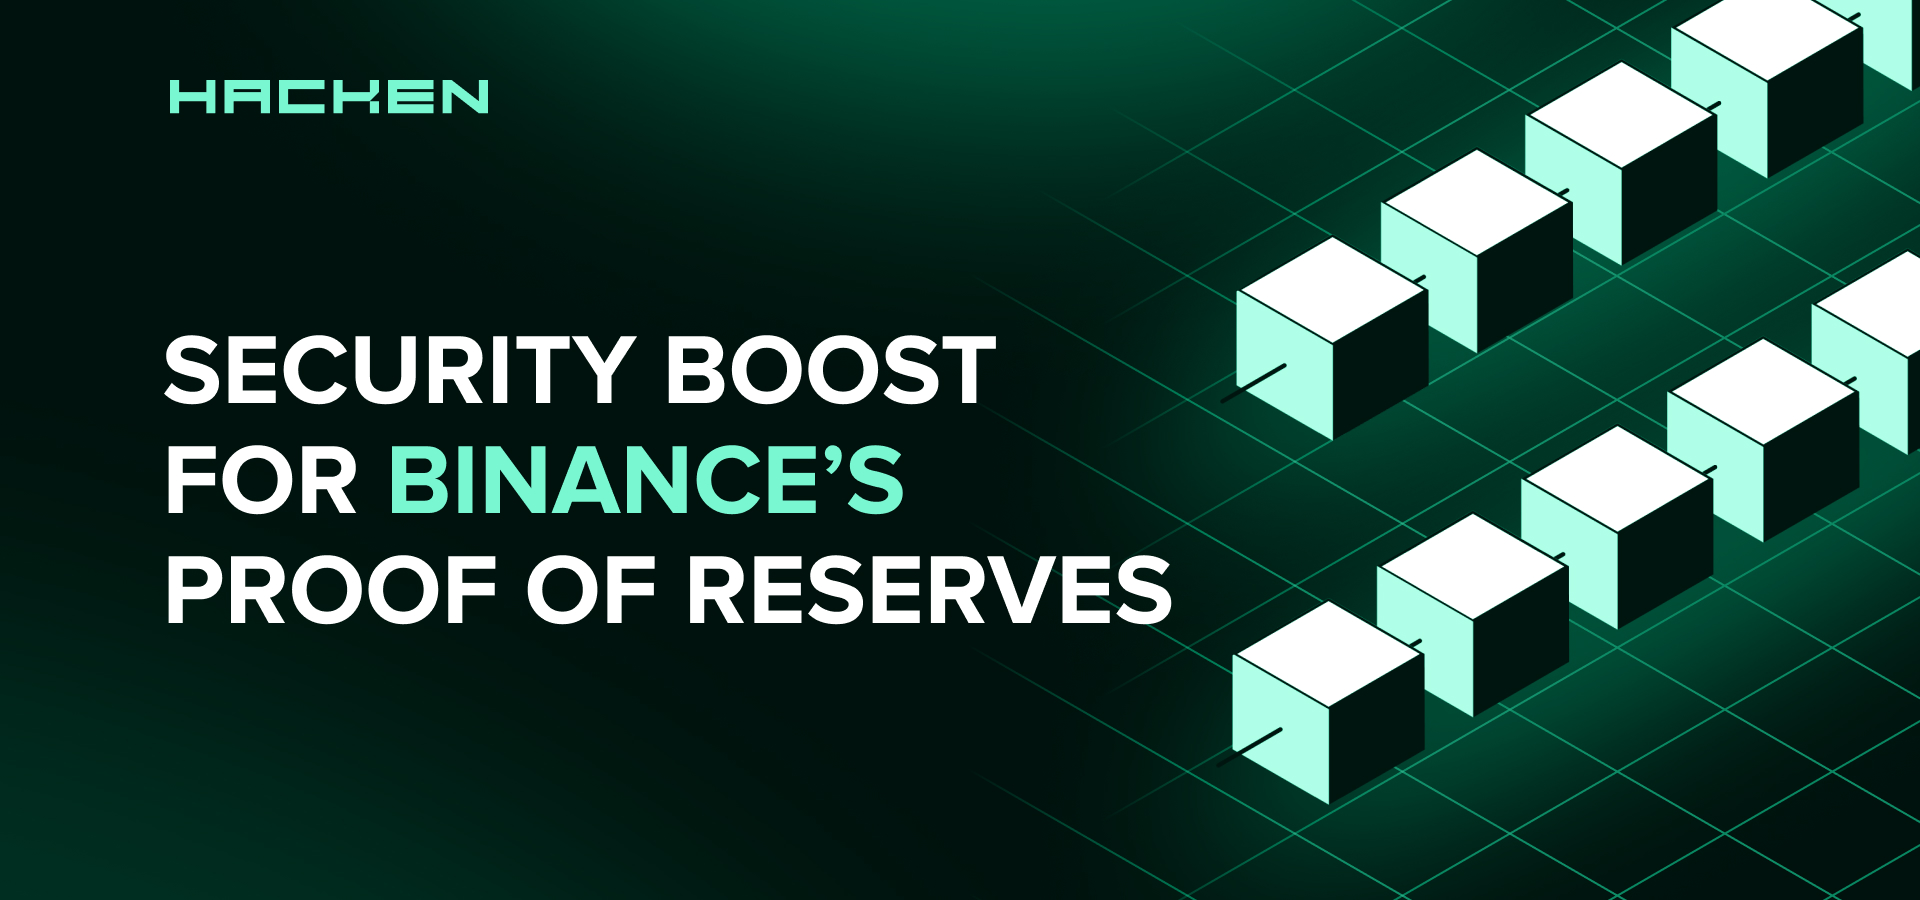 Binance’s Proof of Reserves gets a security boost thanks to Hacken’s discovery